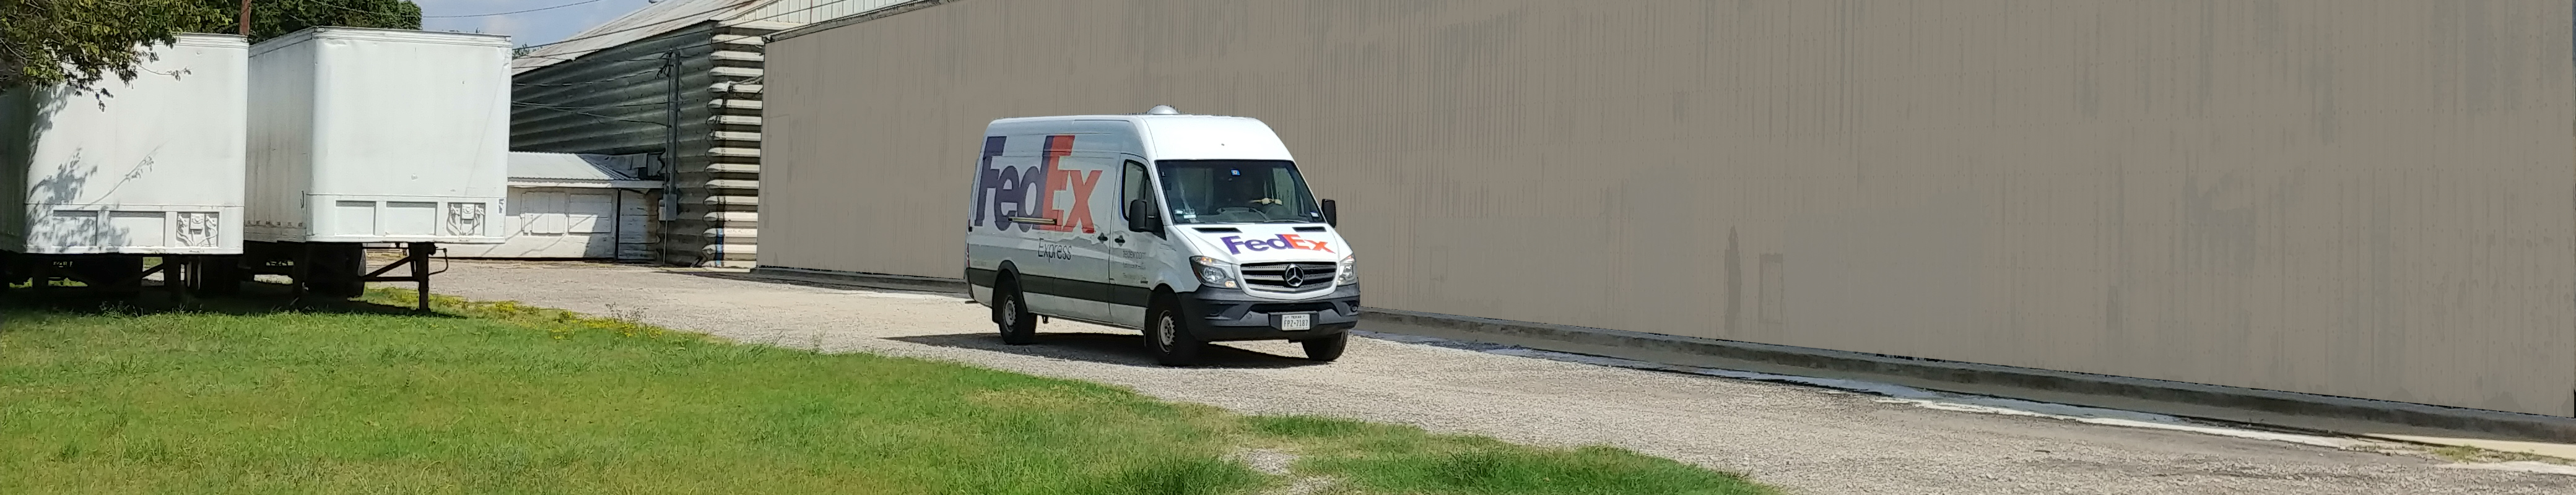 Fedex outside warehouse at Computer Fusion